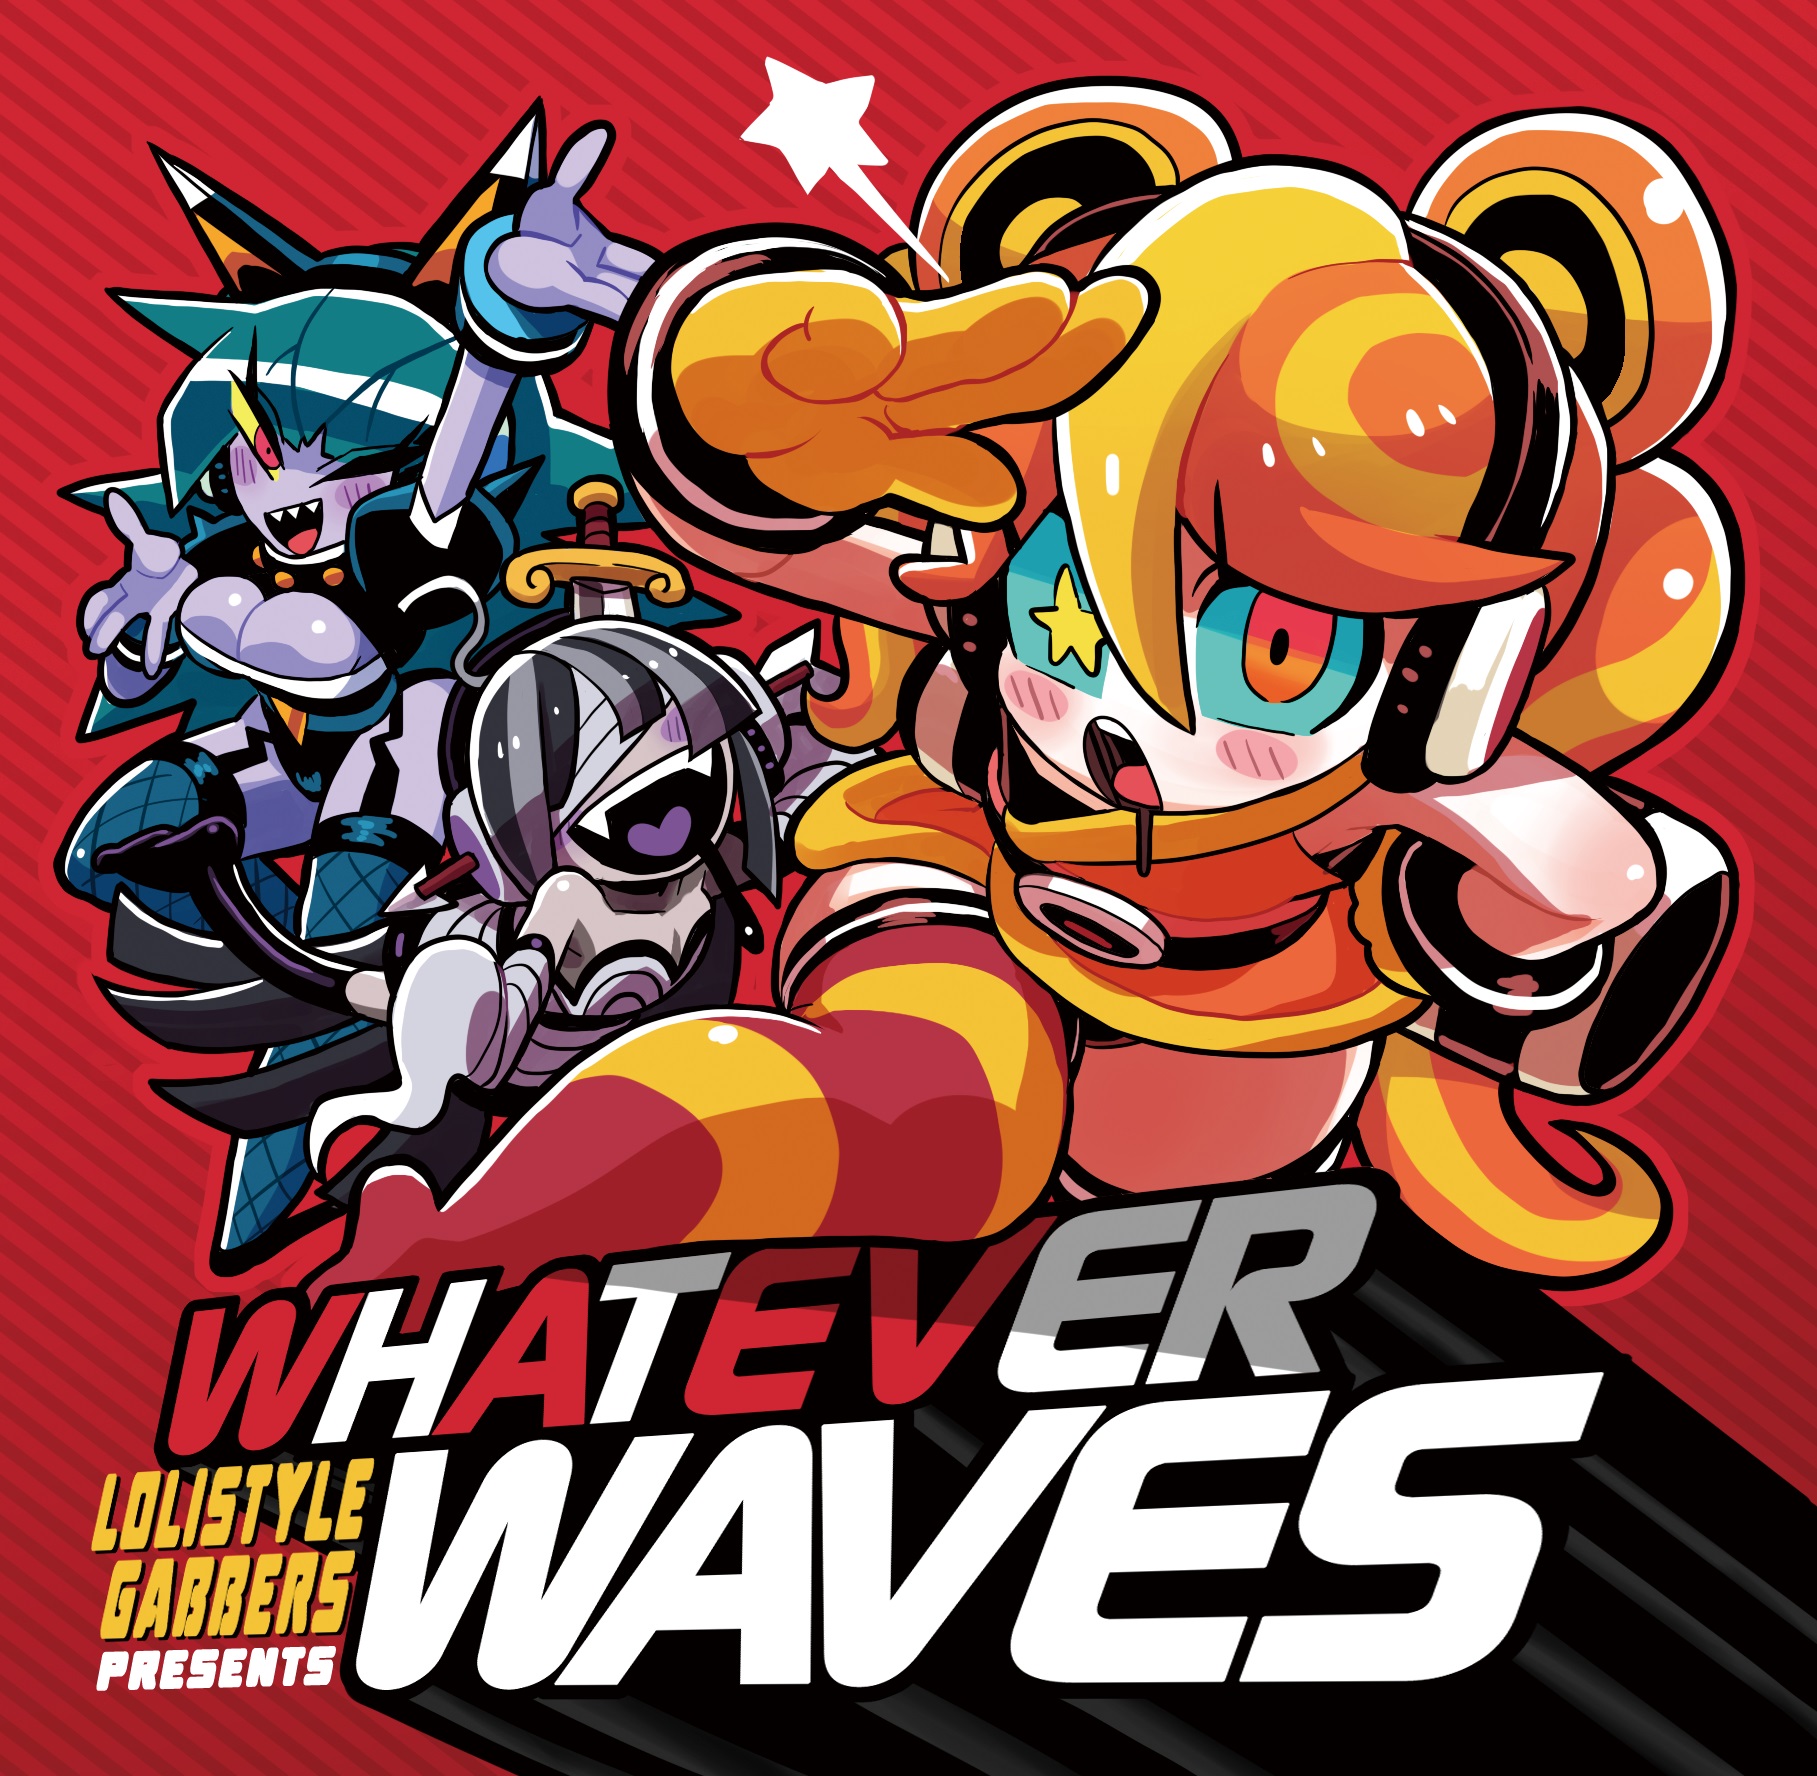 Whatever Waves Compilation Lolistyle Gabbers